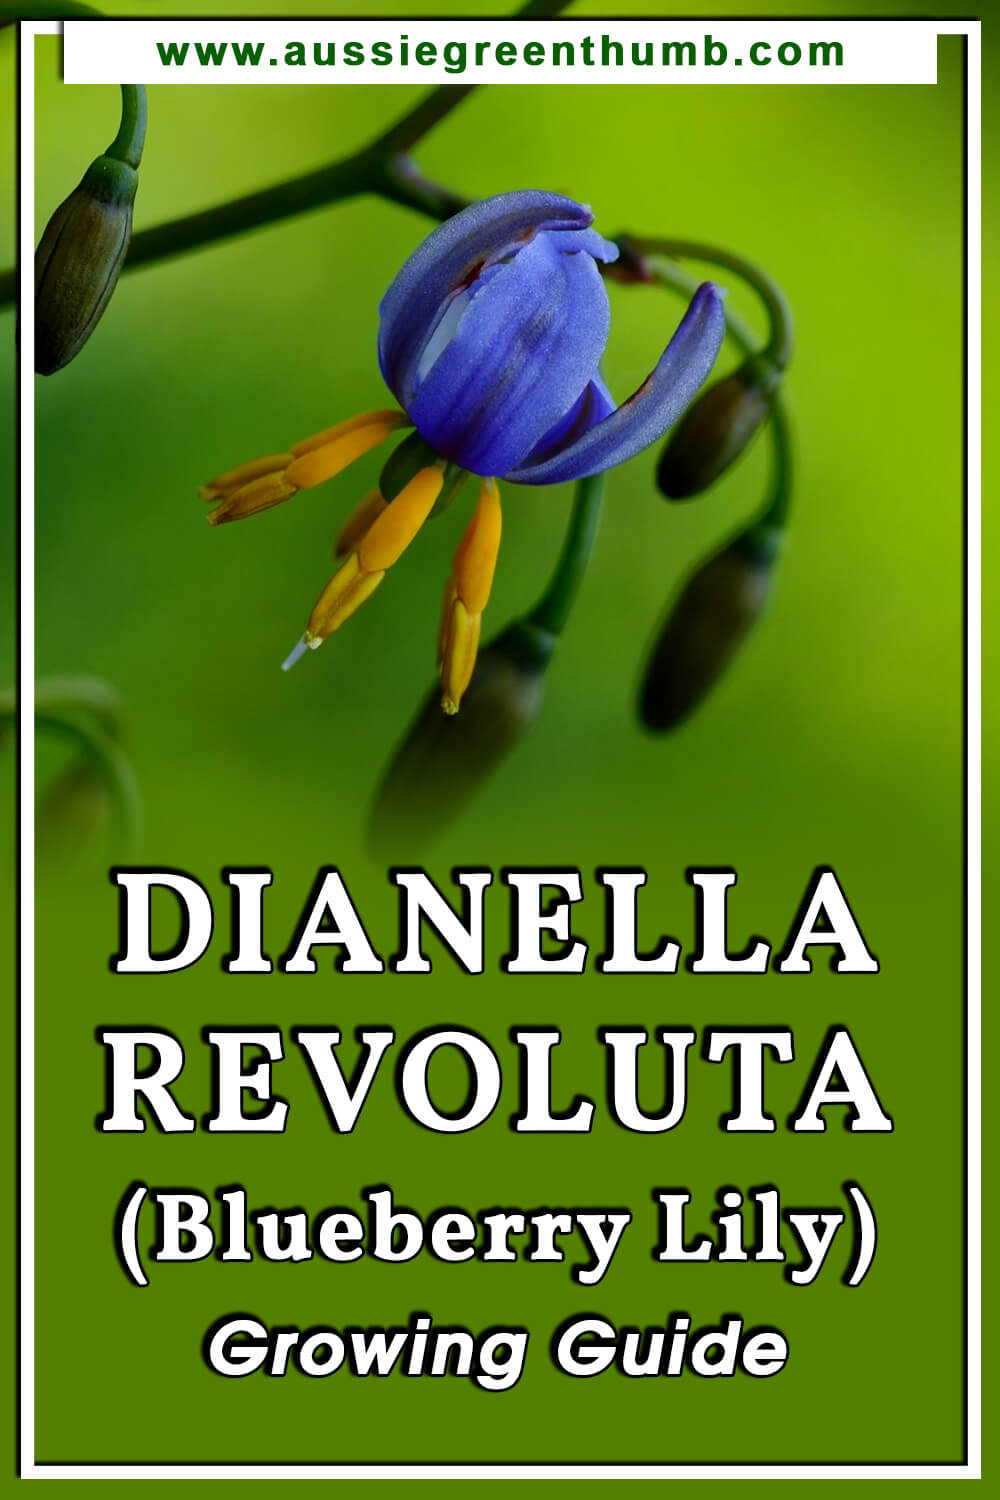 Dianella Revoluta (Blueberry Lily) Growing Guide